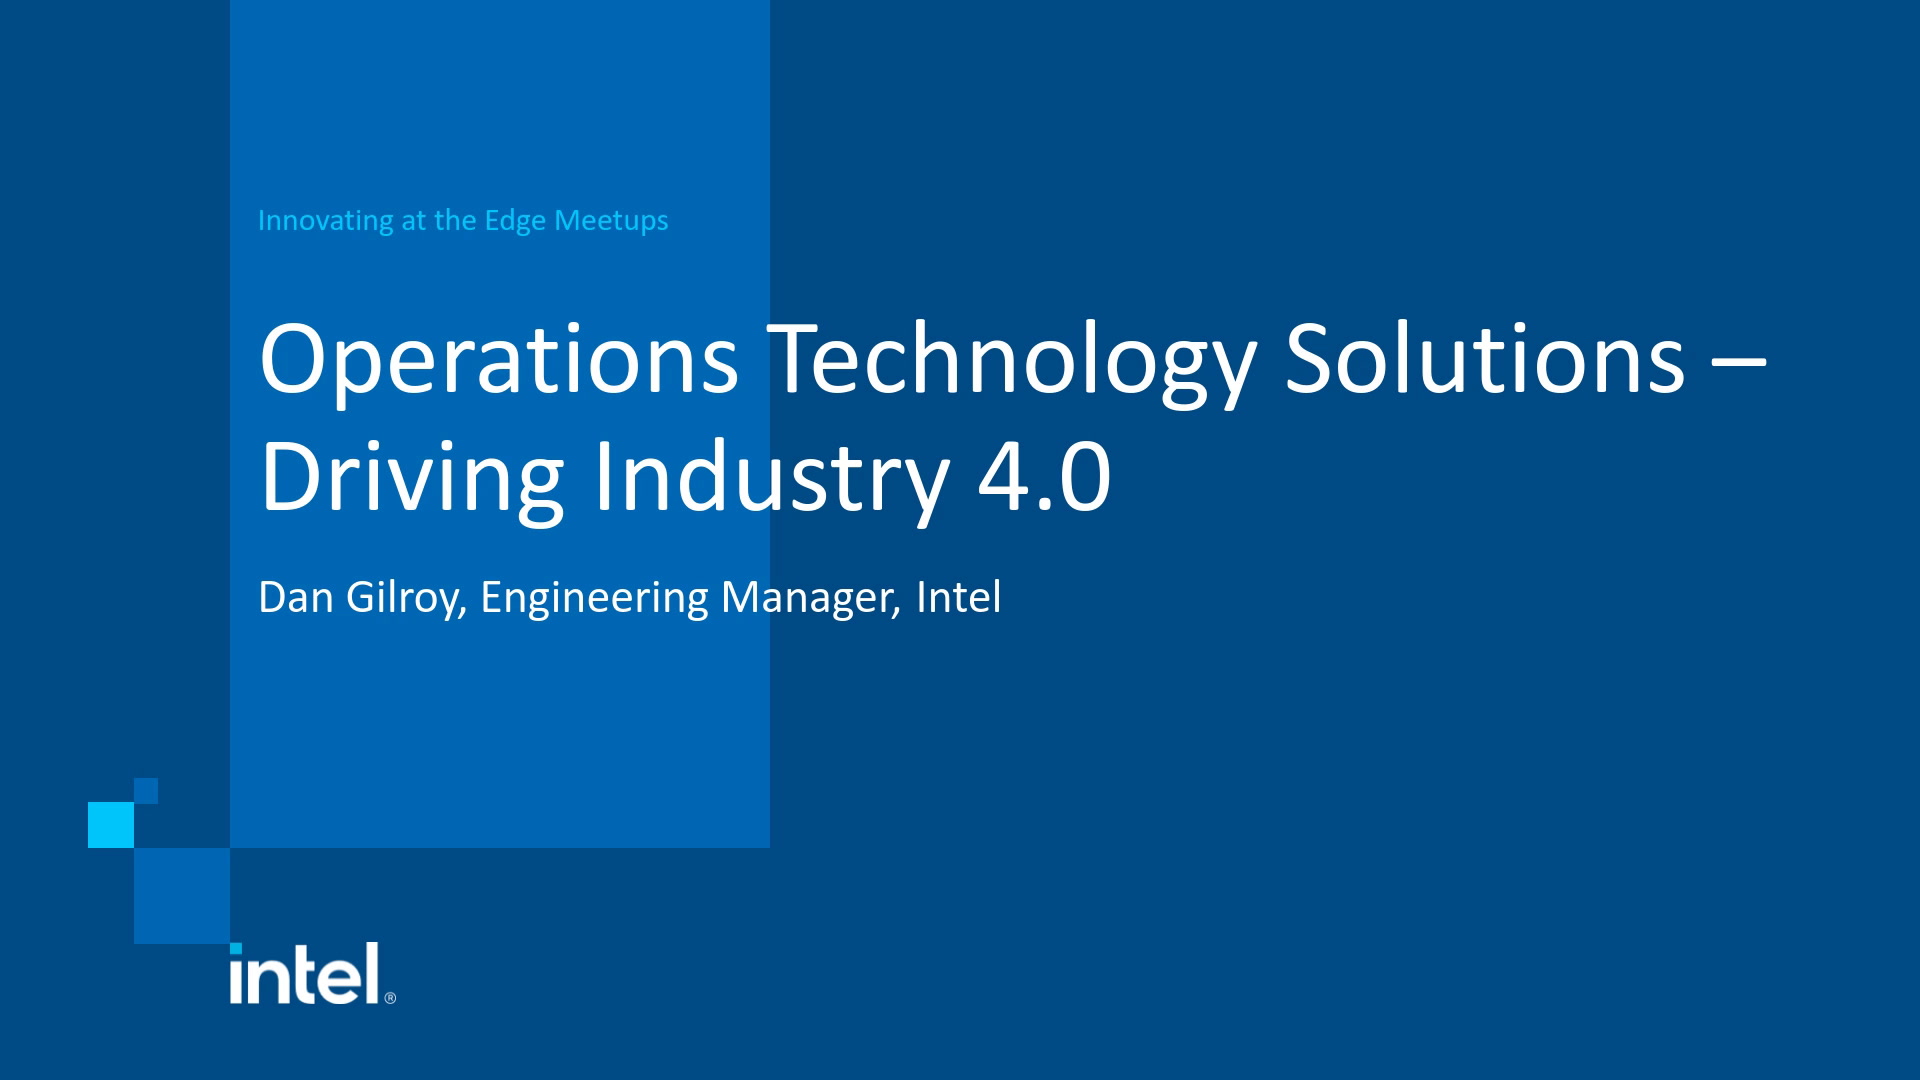 Operations Technology Solutions – Driving Industry 4.0